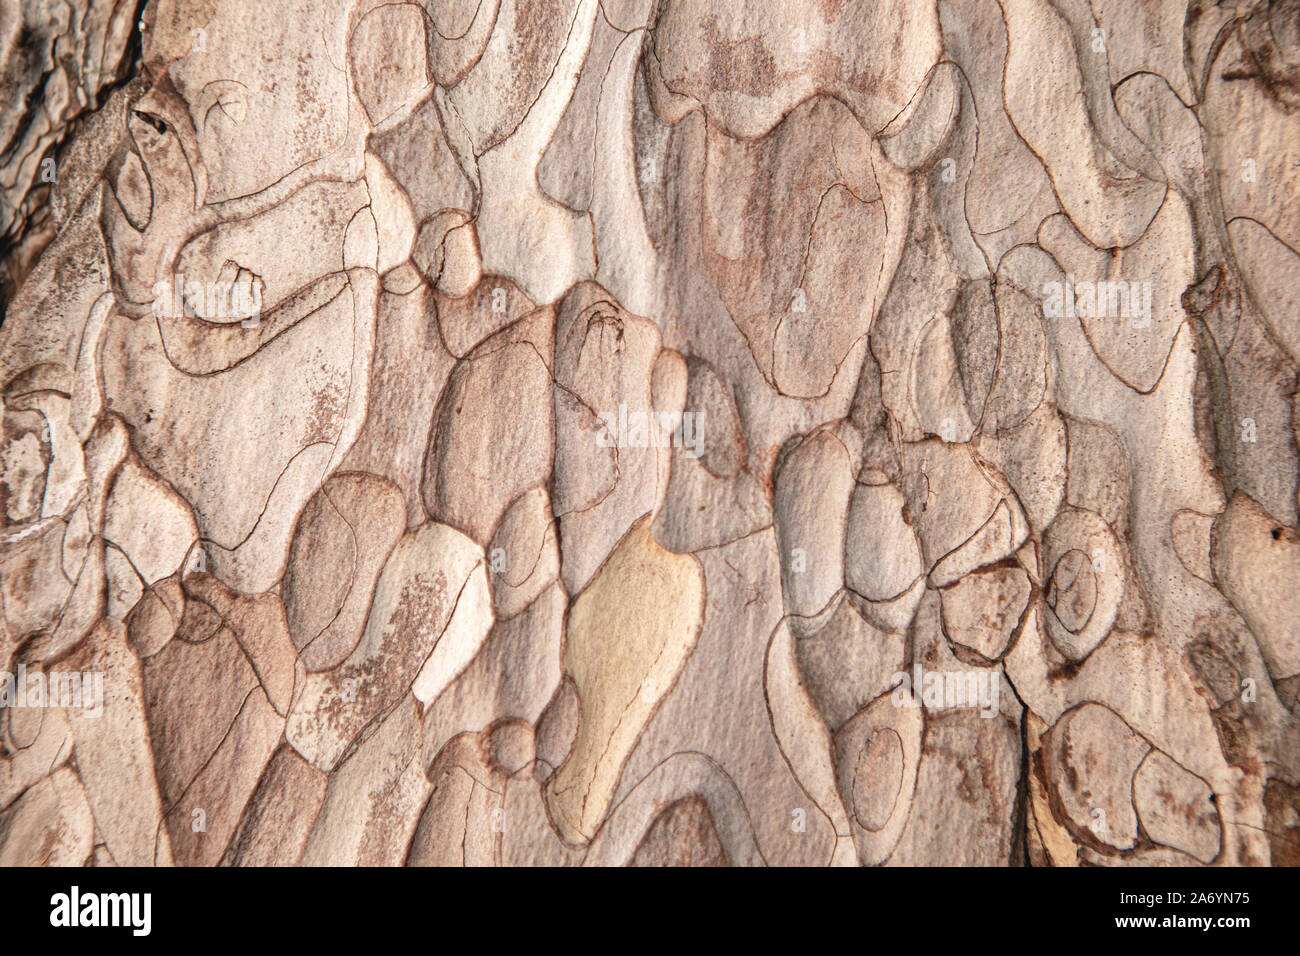 Close-up of grunge textured old pine tree bark texture. Abstract nature background for design, decor and skins. Stock Photo